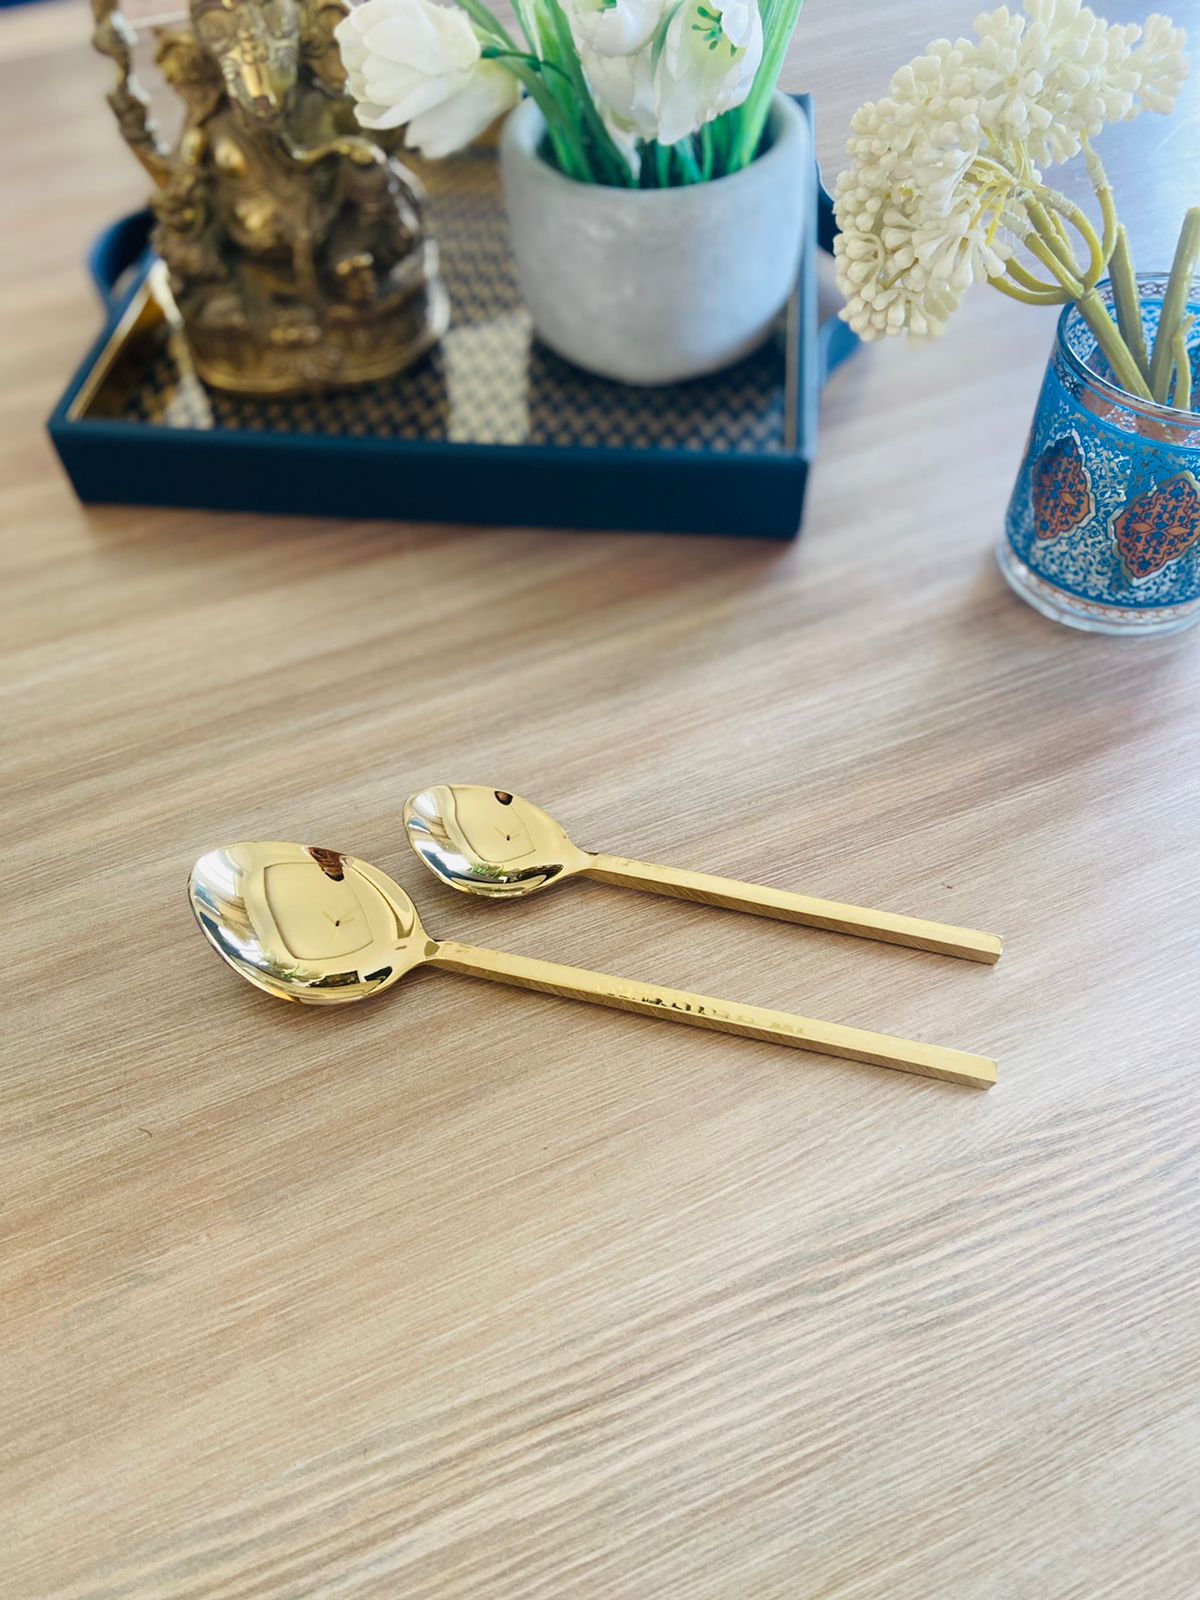 Cutlery Set of 24 - Hammered in Champagne Gold l Hammered Gold Spoon Set l Luxury Cutlery Set